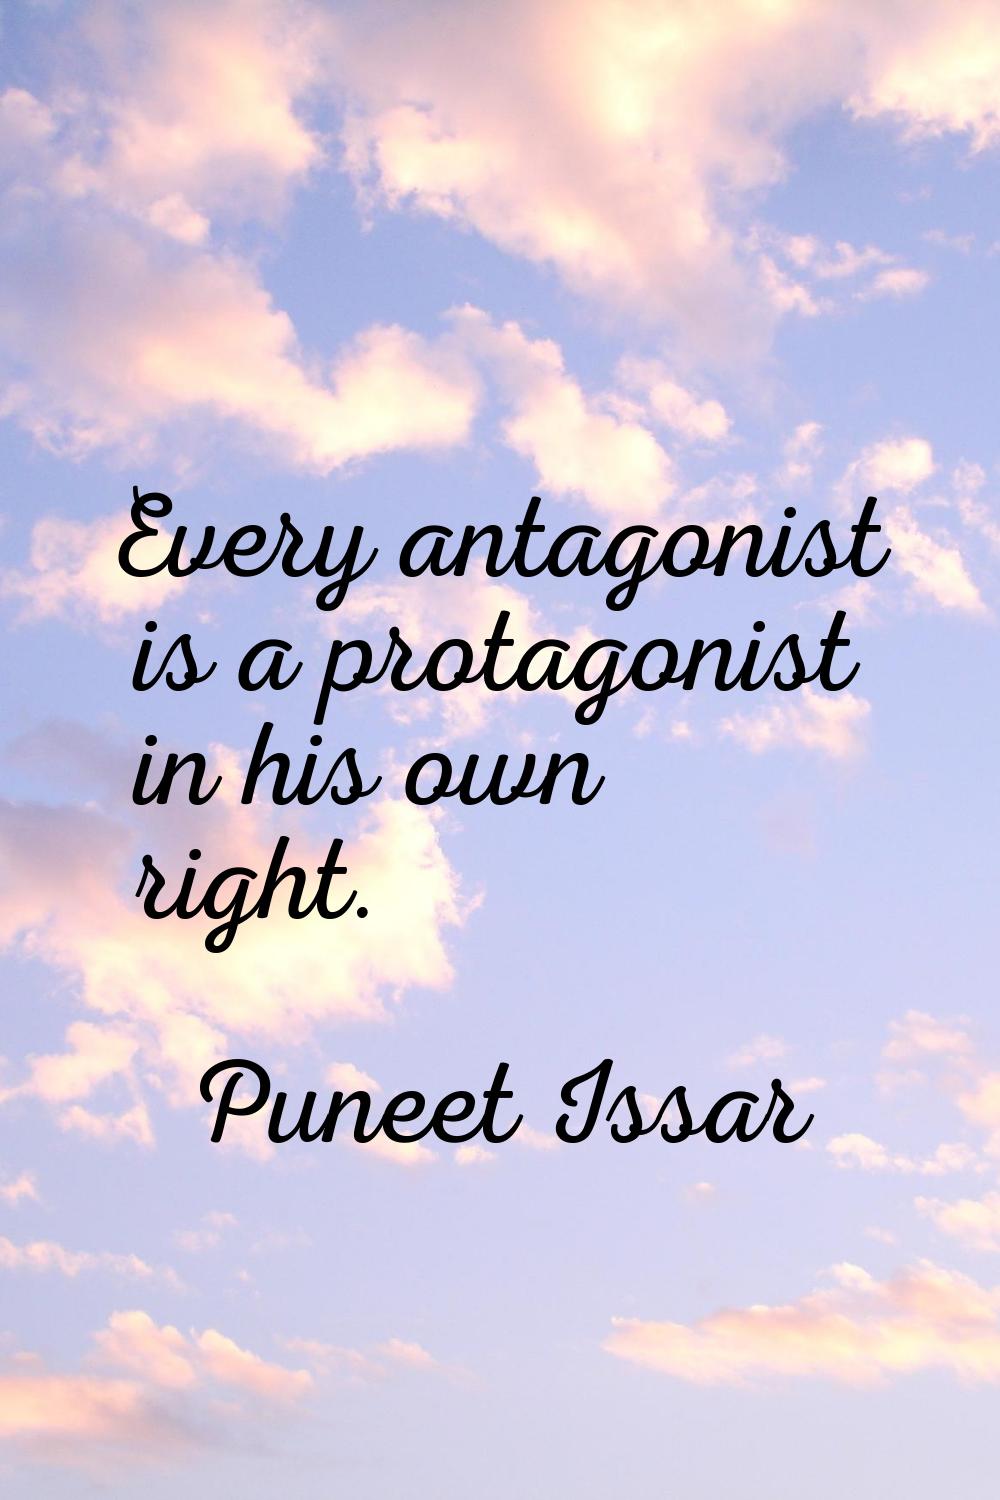 Every antagonist is a protagonist in his own right.